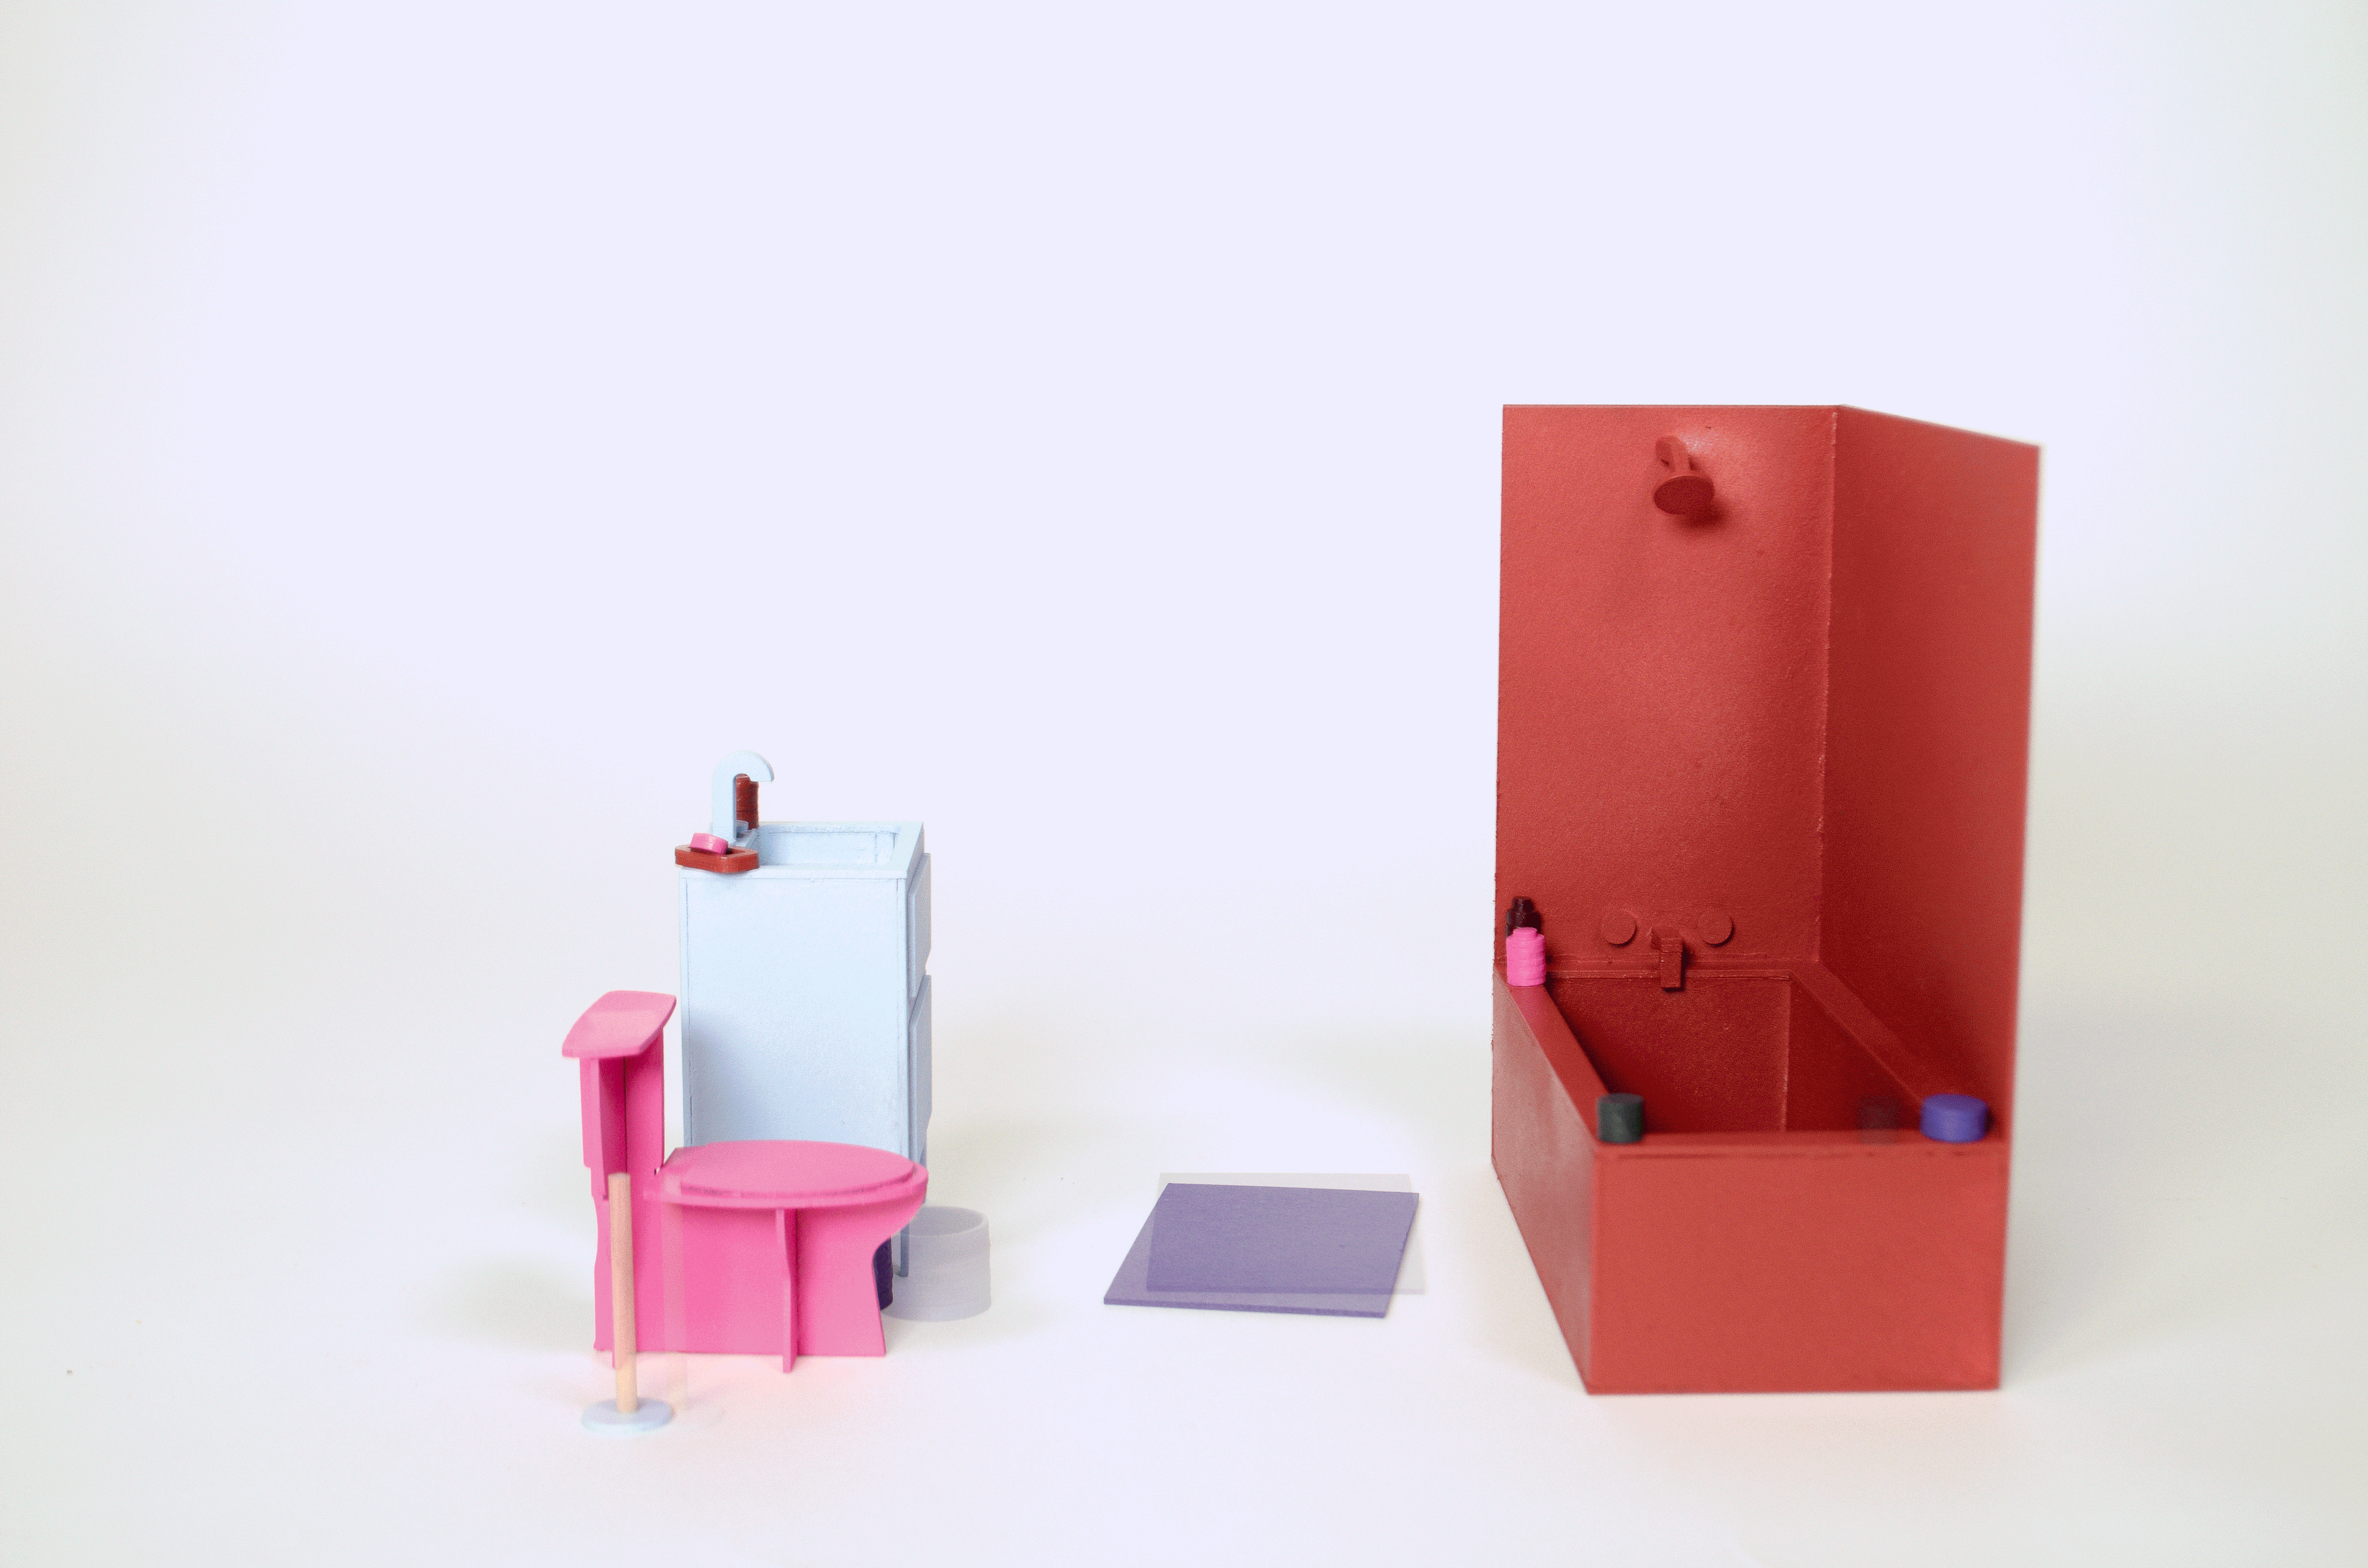 /stop%20motion%20gif%20of%20objects%20depicting%20a%20bathroom%20scene%2C%20documenting%20the%20movement%20of%20objects.